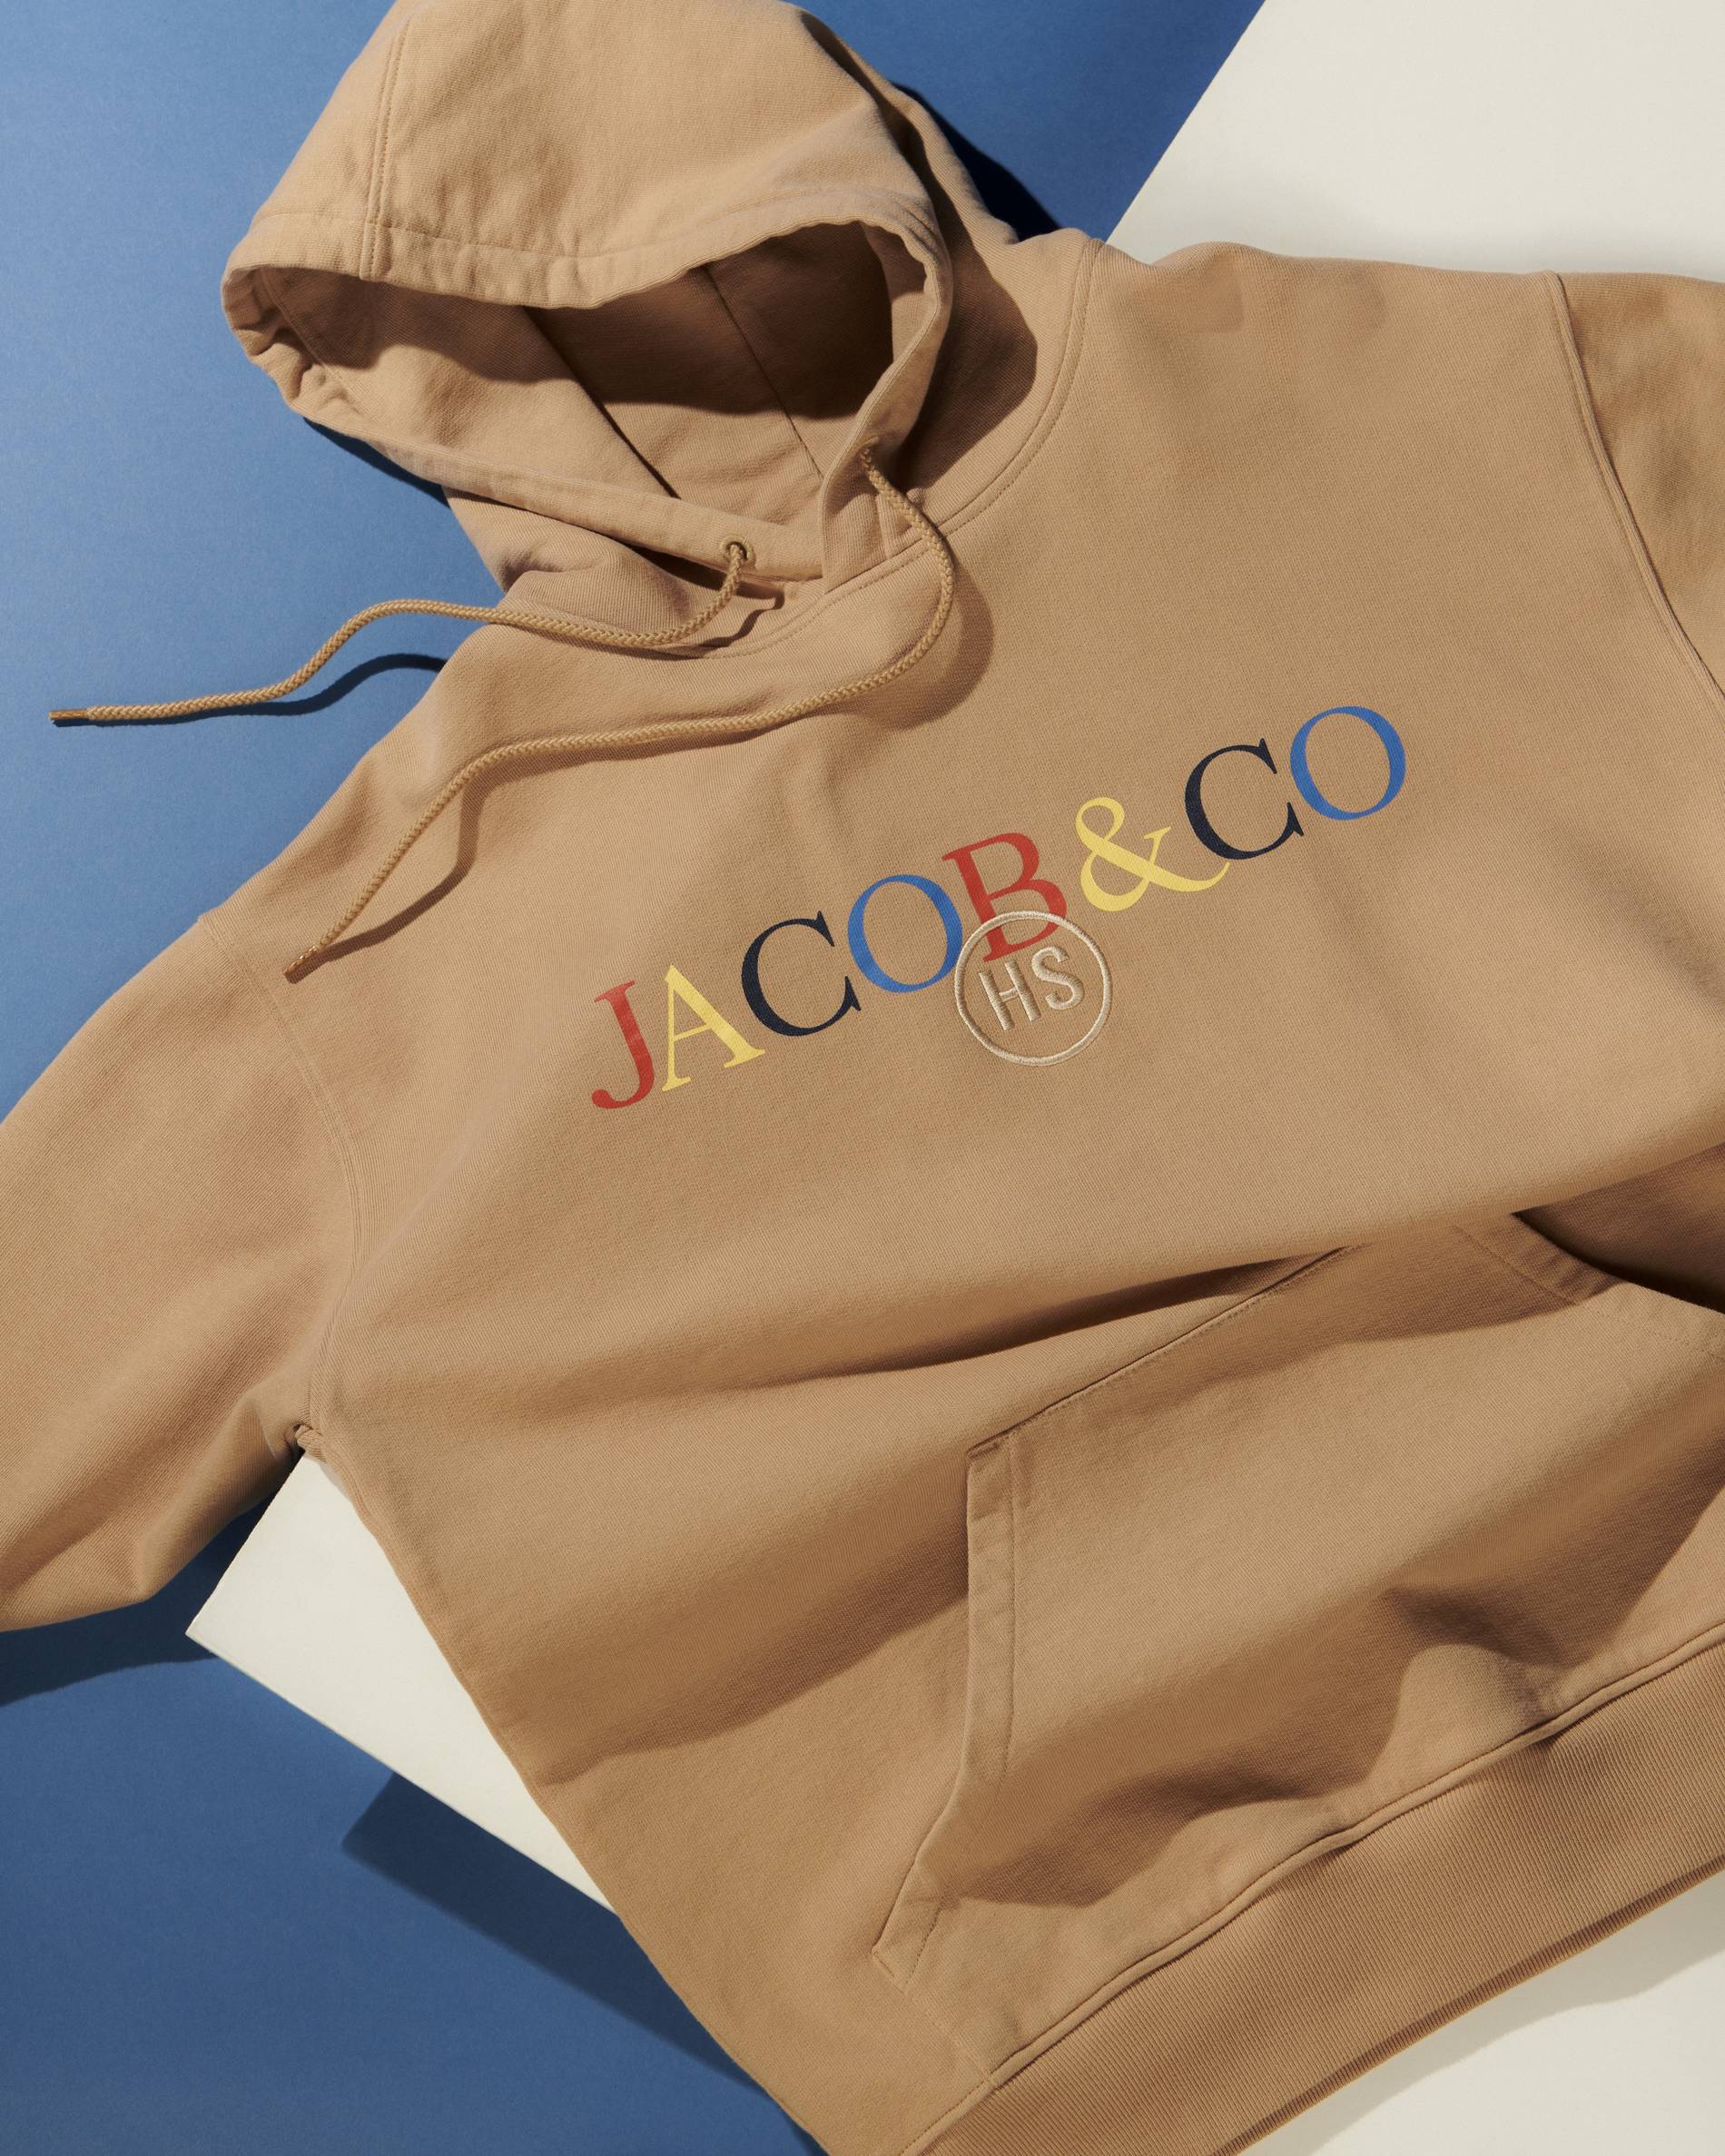 Jacob & Co x Highsnobiety collection